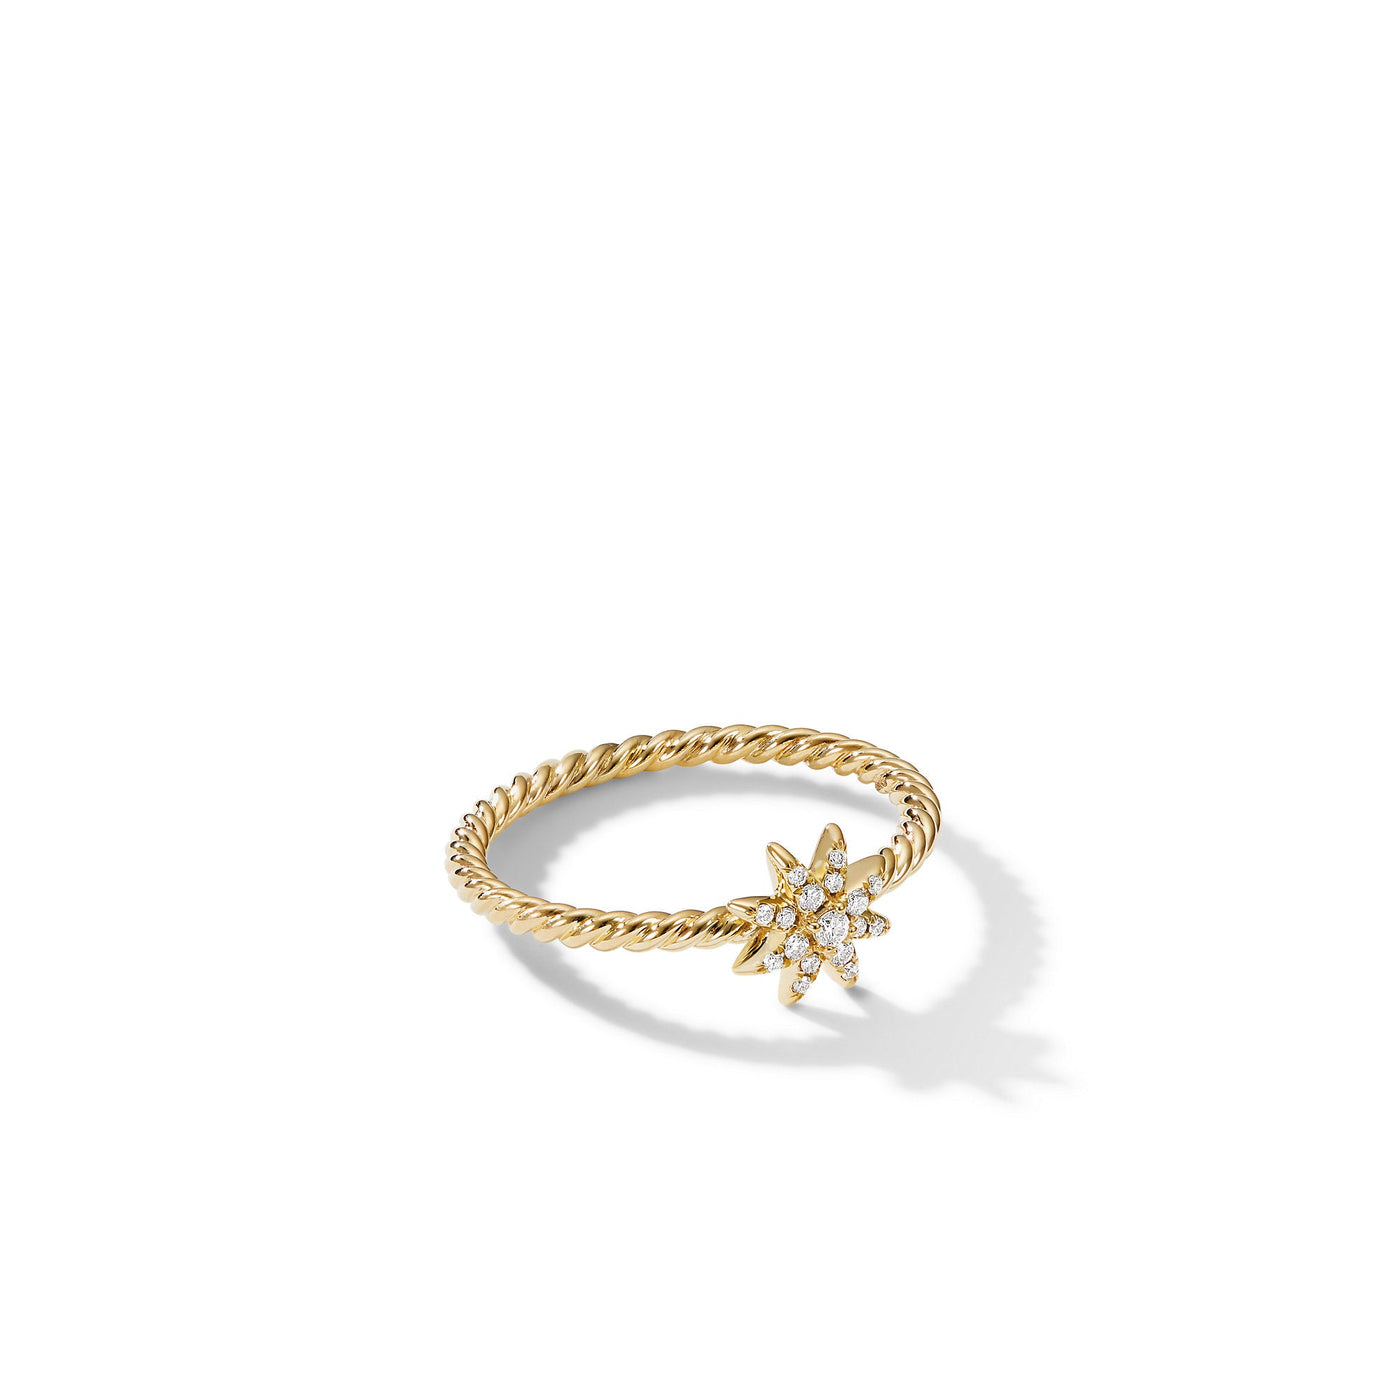 Petite Starburst Station Ring in 18K Yellow Gold with Diamonds\, 7.5mm